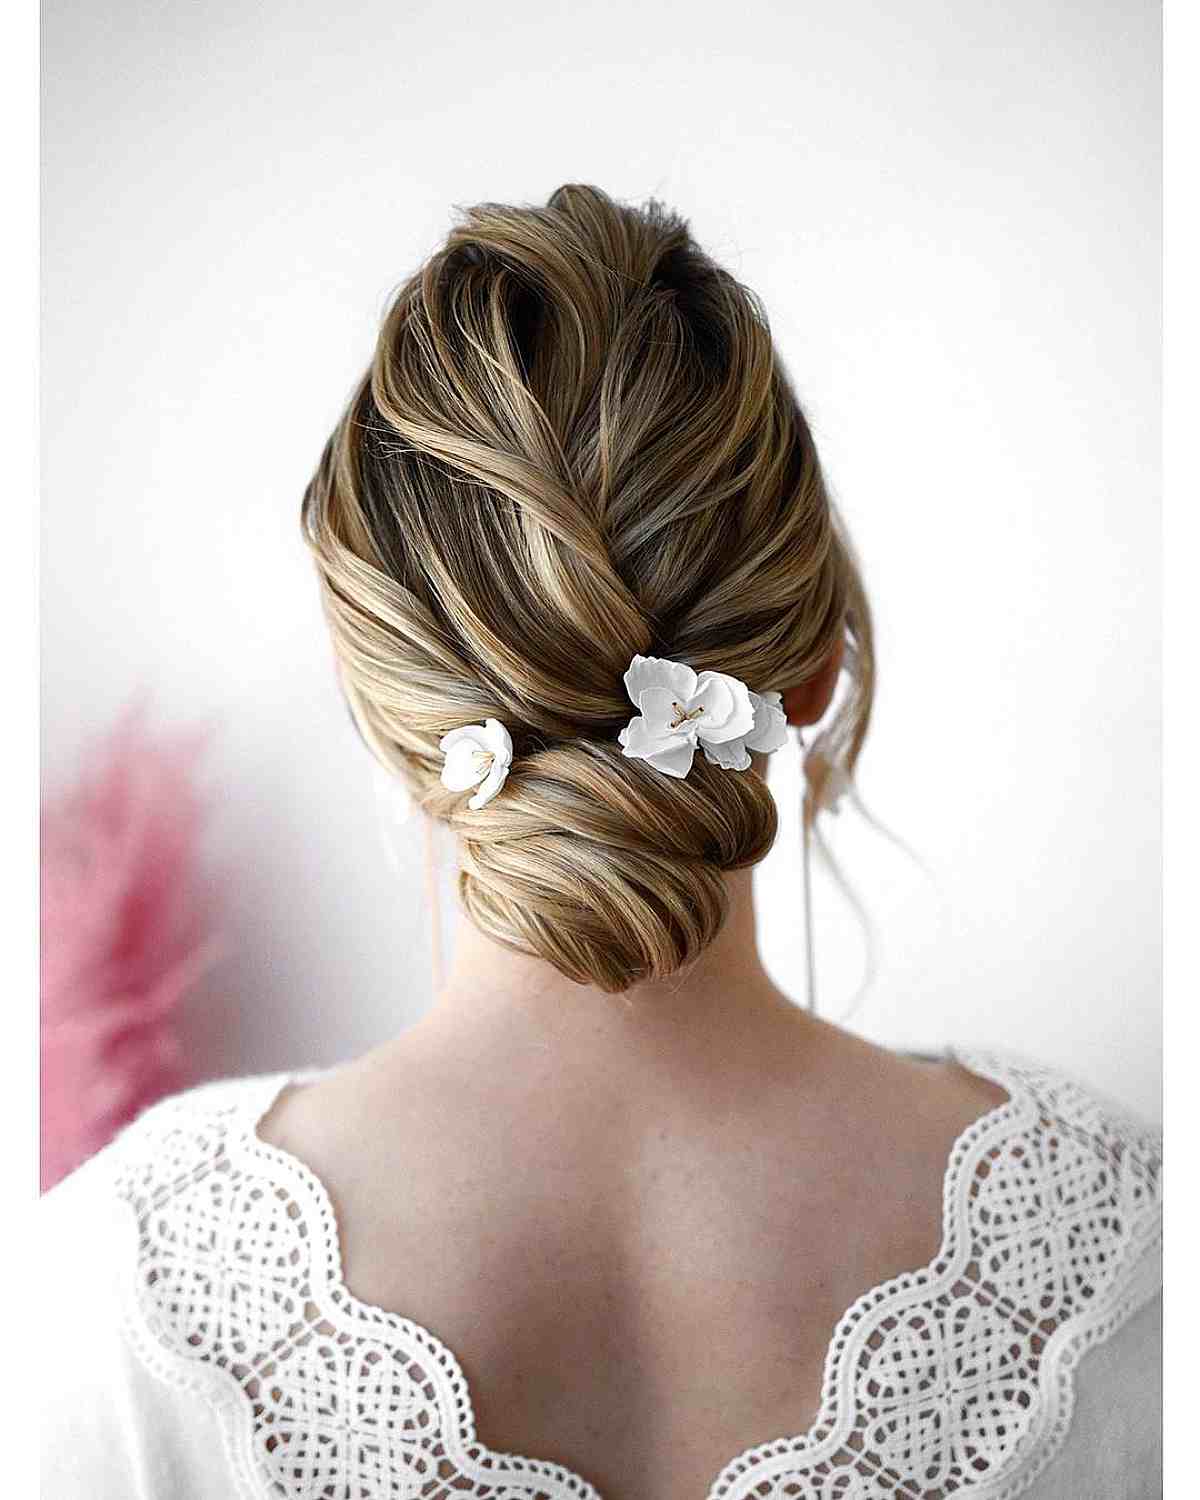 A Chignon With Serious Flower Power for Date Night